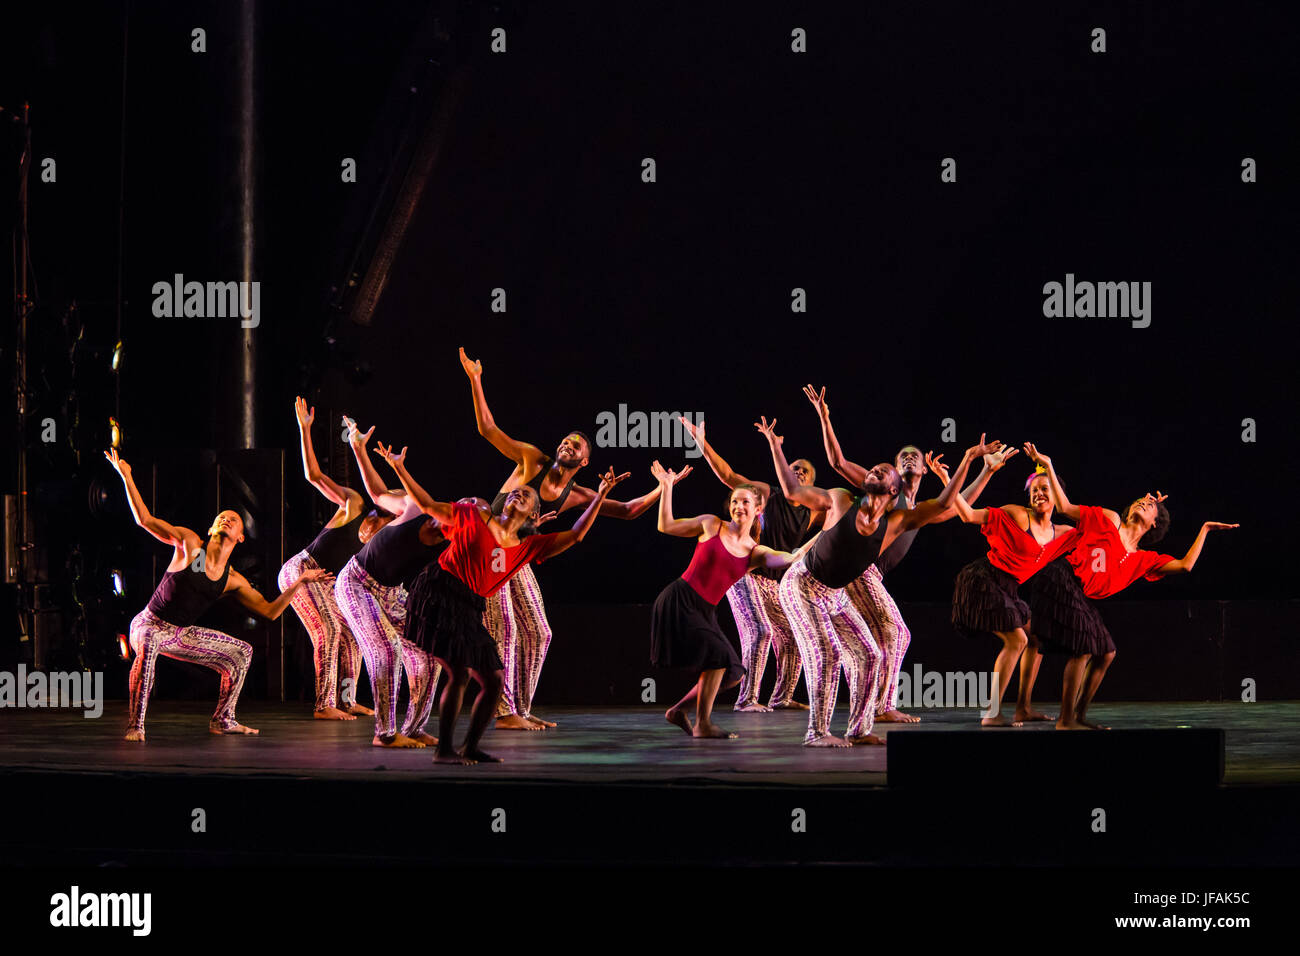 Brooklyn, Us. 30th June, 2017. Brooklyn, NY - 30 June 2017. The BRIC Celebrate Brooklyn! Festival summer concert series featured a performance by Garth Fagan Dance, choreographed by the Tony and Olivier award-winning choreographer of the Broadway hit The Lion King, Garth Fagan. The troupe performed two new pieces, In Conflict and A Moderate Cease, along with some revival pieces, all featuring the company's blend of modern, Afro-Caribbean, and classical dance. Credit: Ed Lefkowicz/Alamy Live News Stock Photo